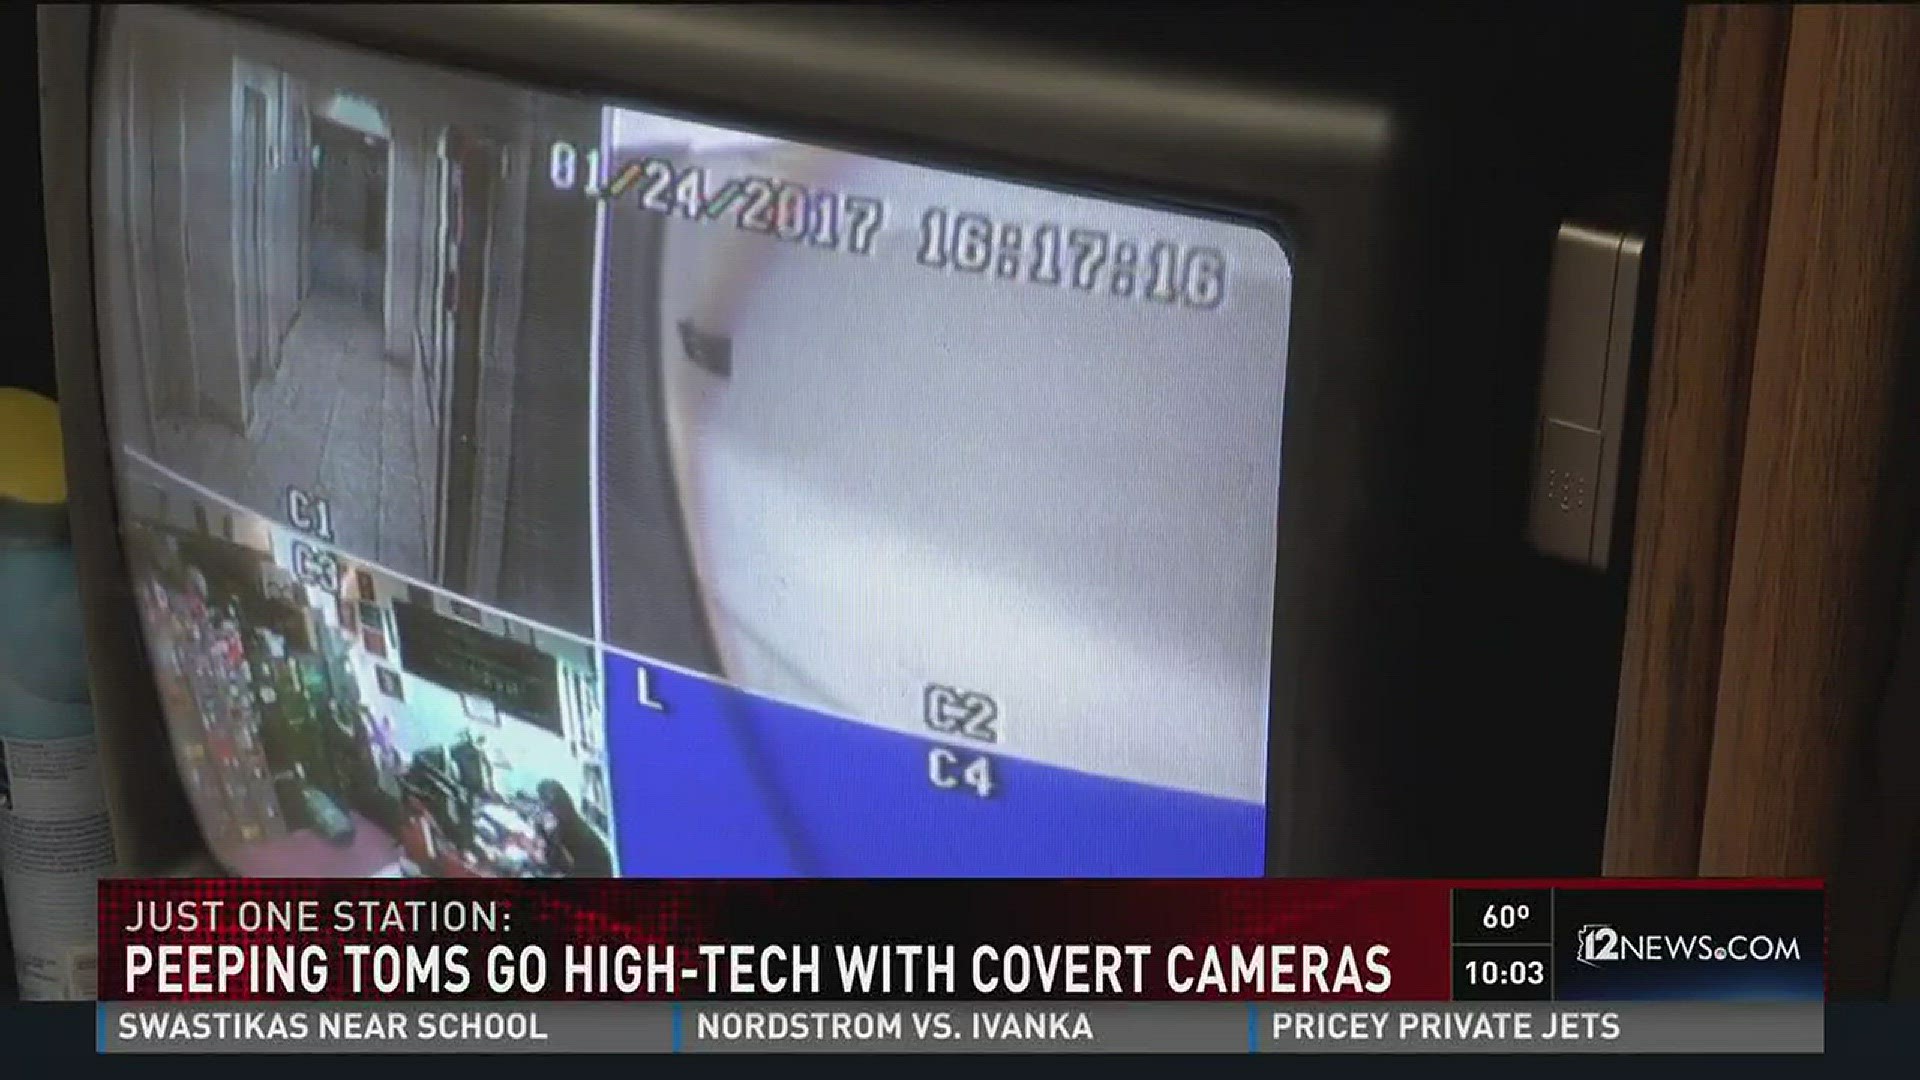 Peeping toms high-tech with covert cameras image